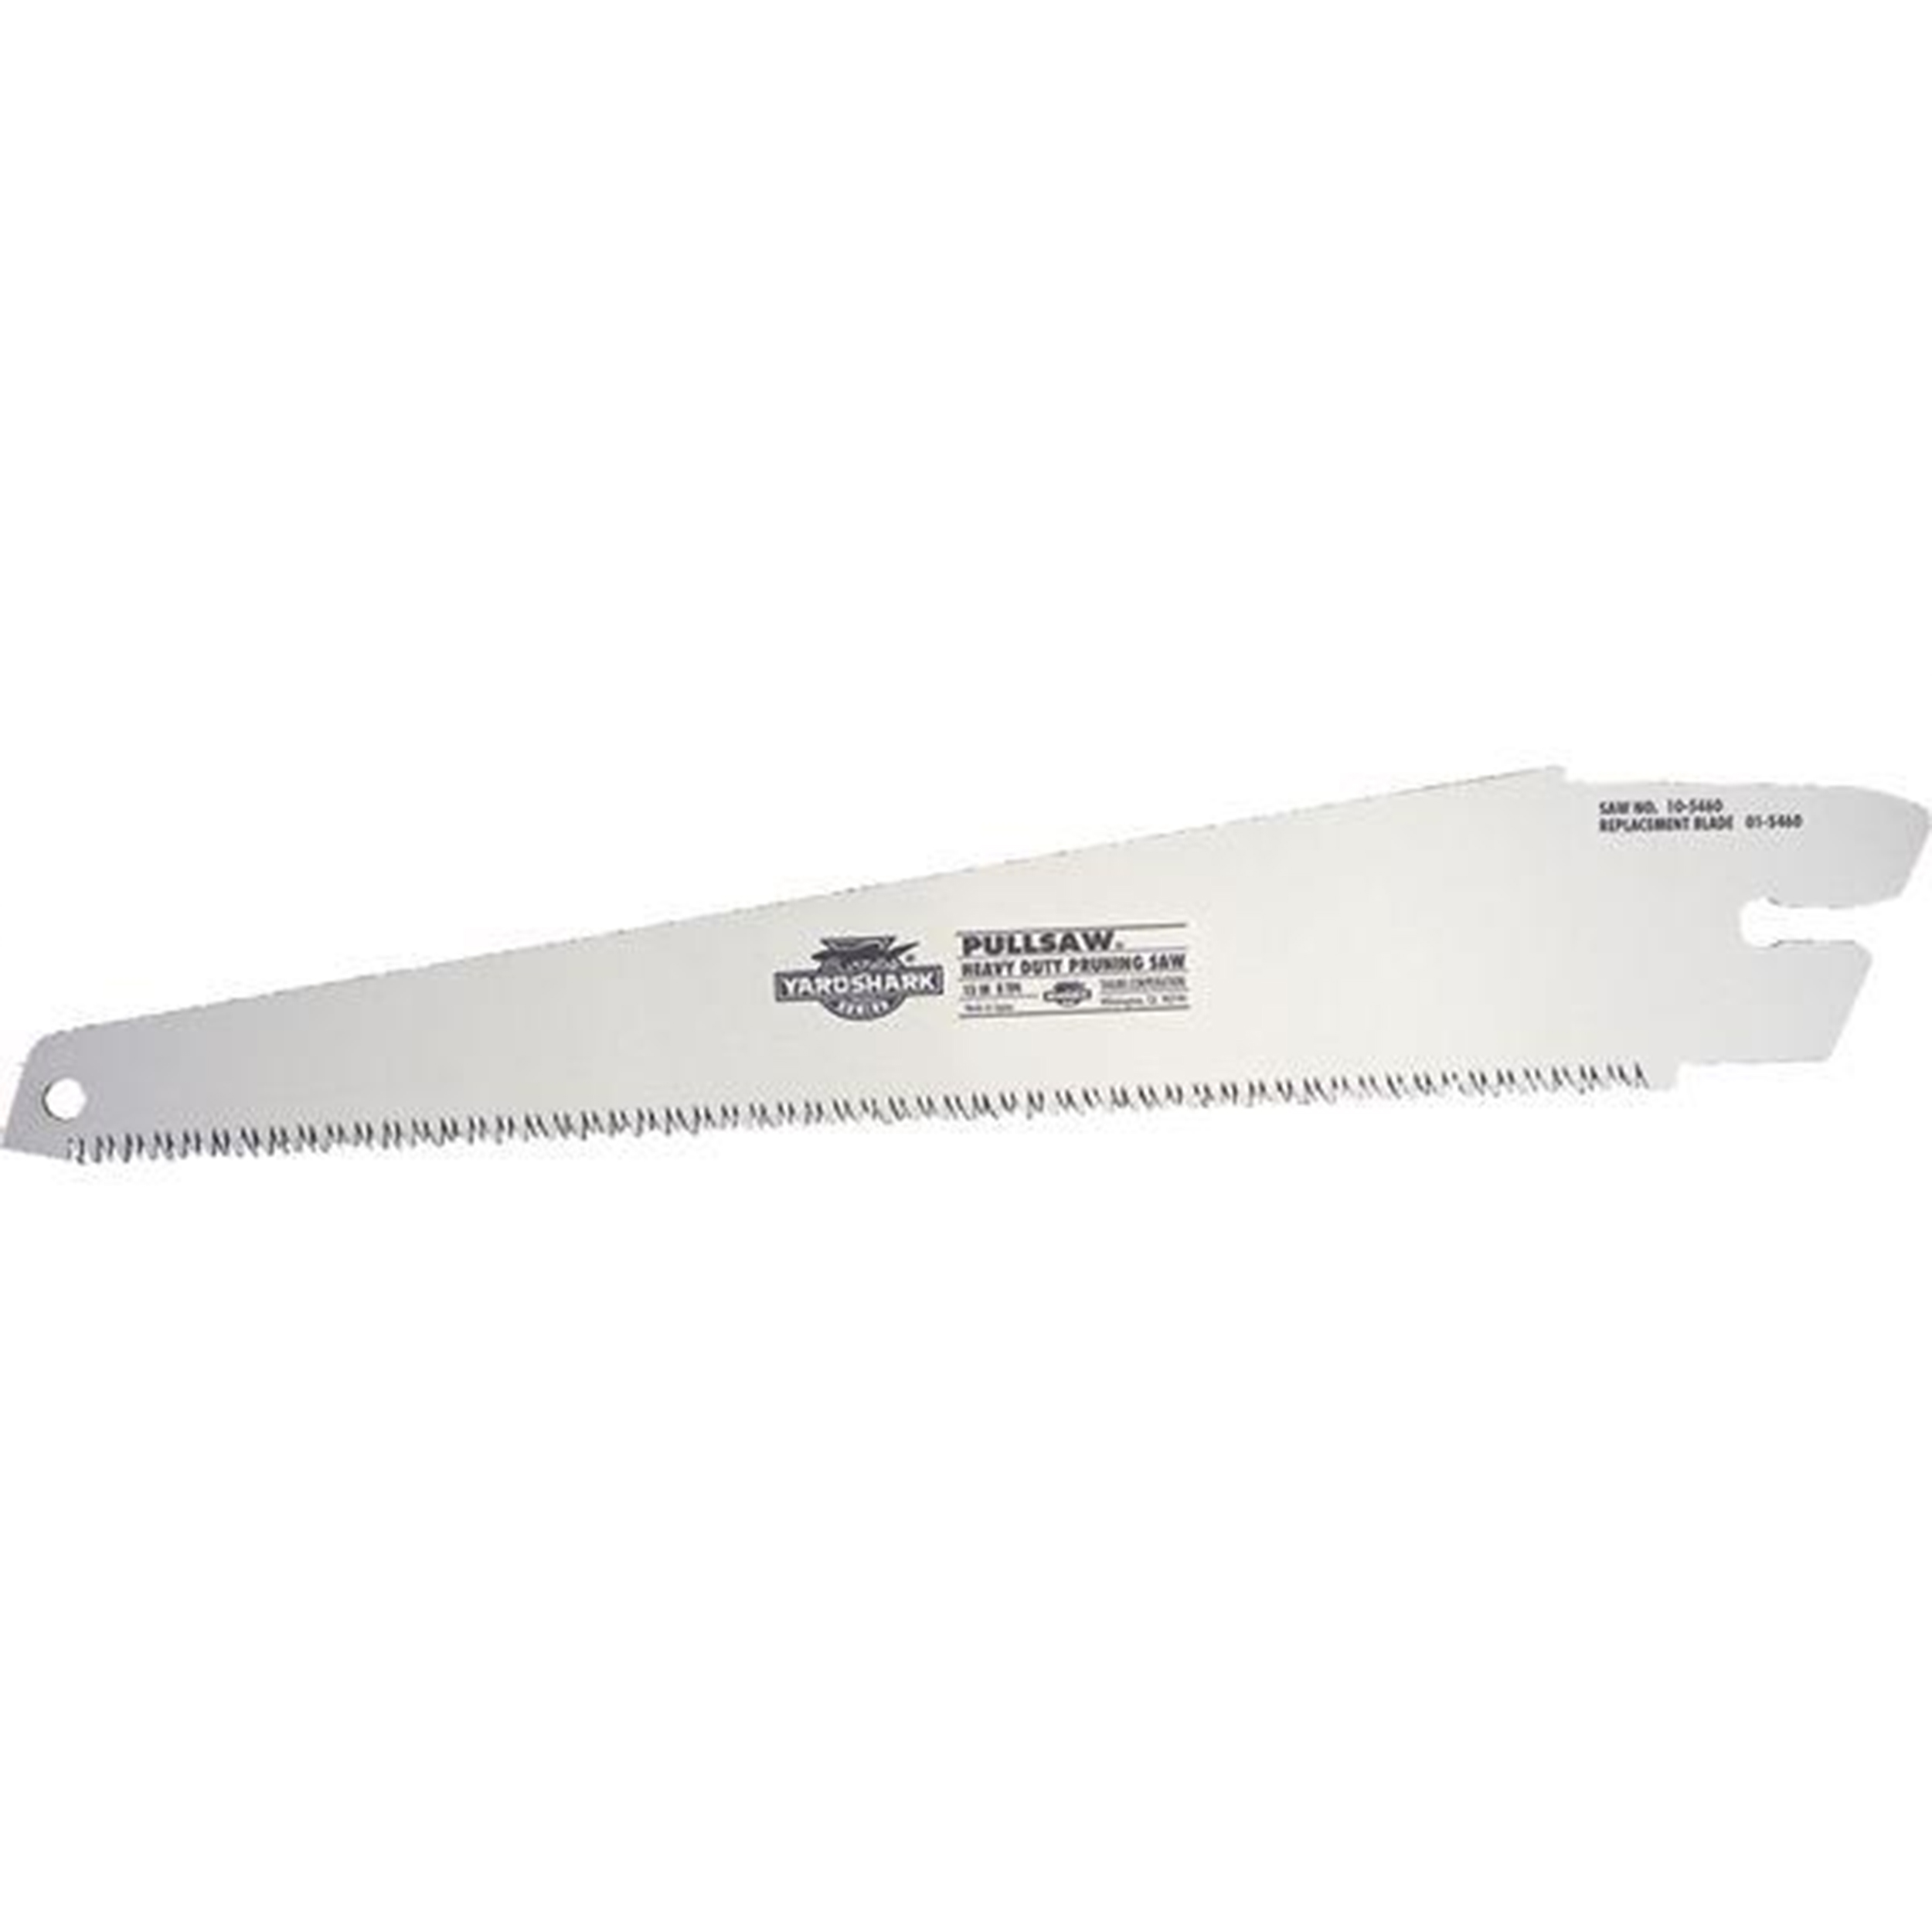 Replacement Blade 01-5460 For 15" Fine-cut Pruning Saw 10-5460